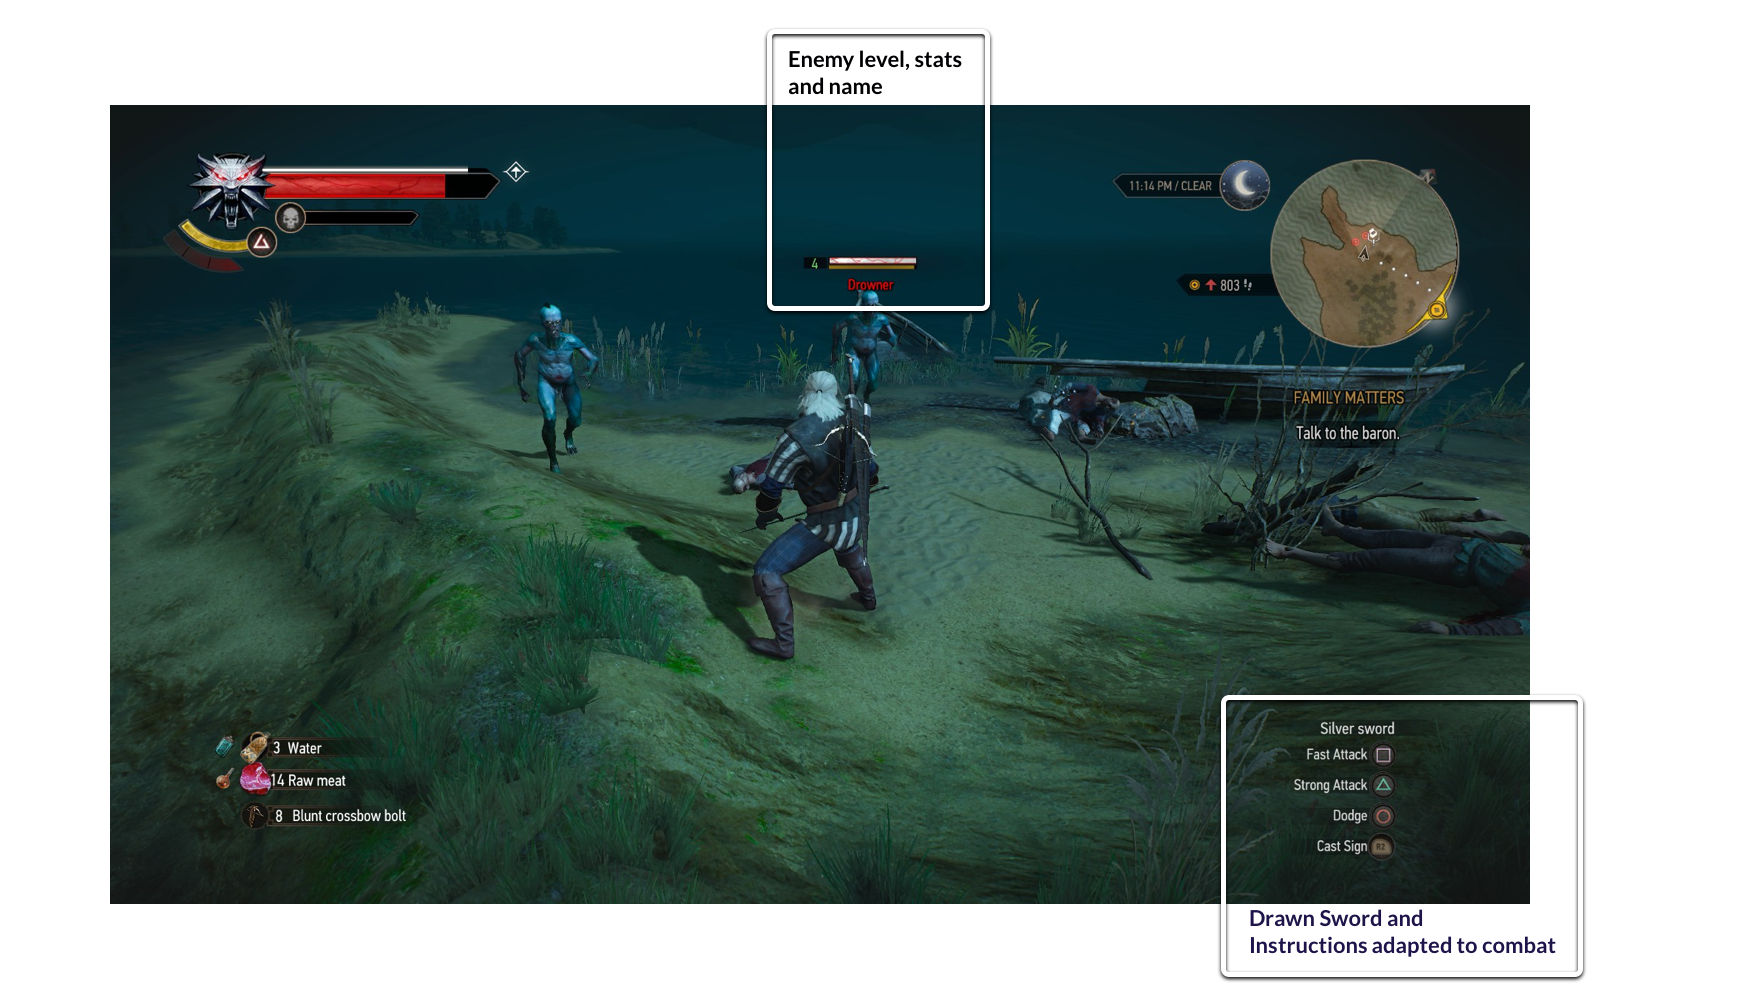 An explanation of The Witcher 3: Wild Hunt’s HUD when not in combat and without a drawn weapon.